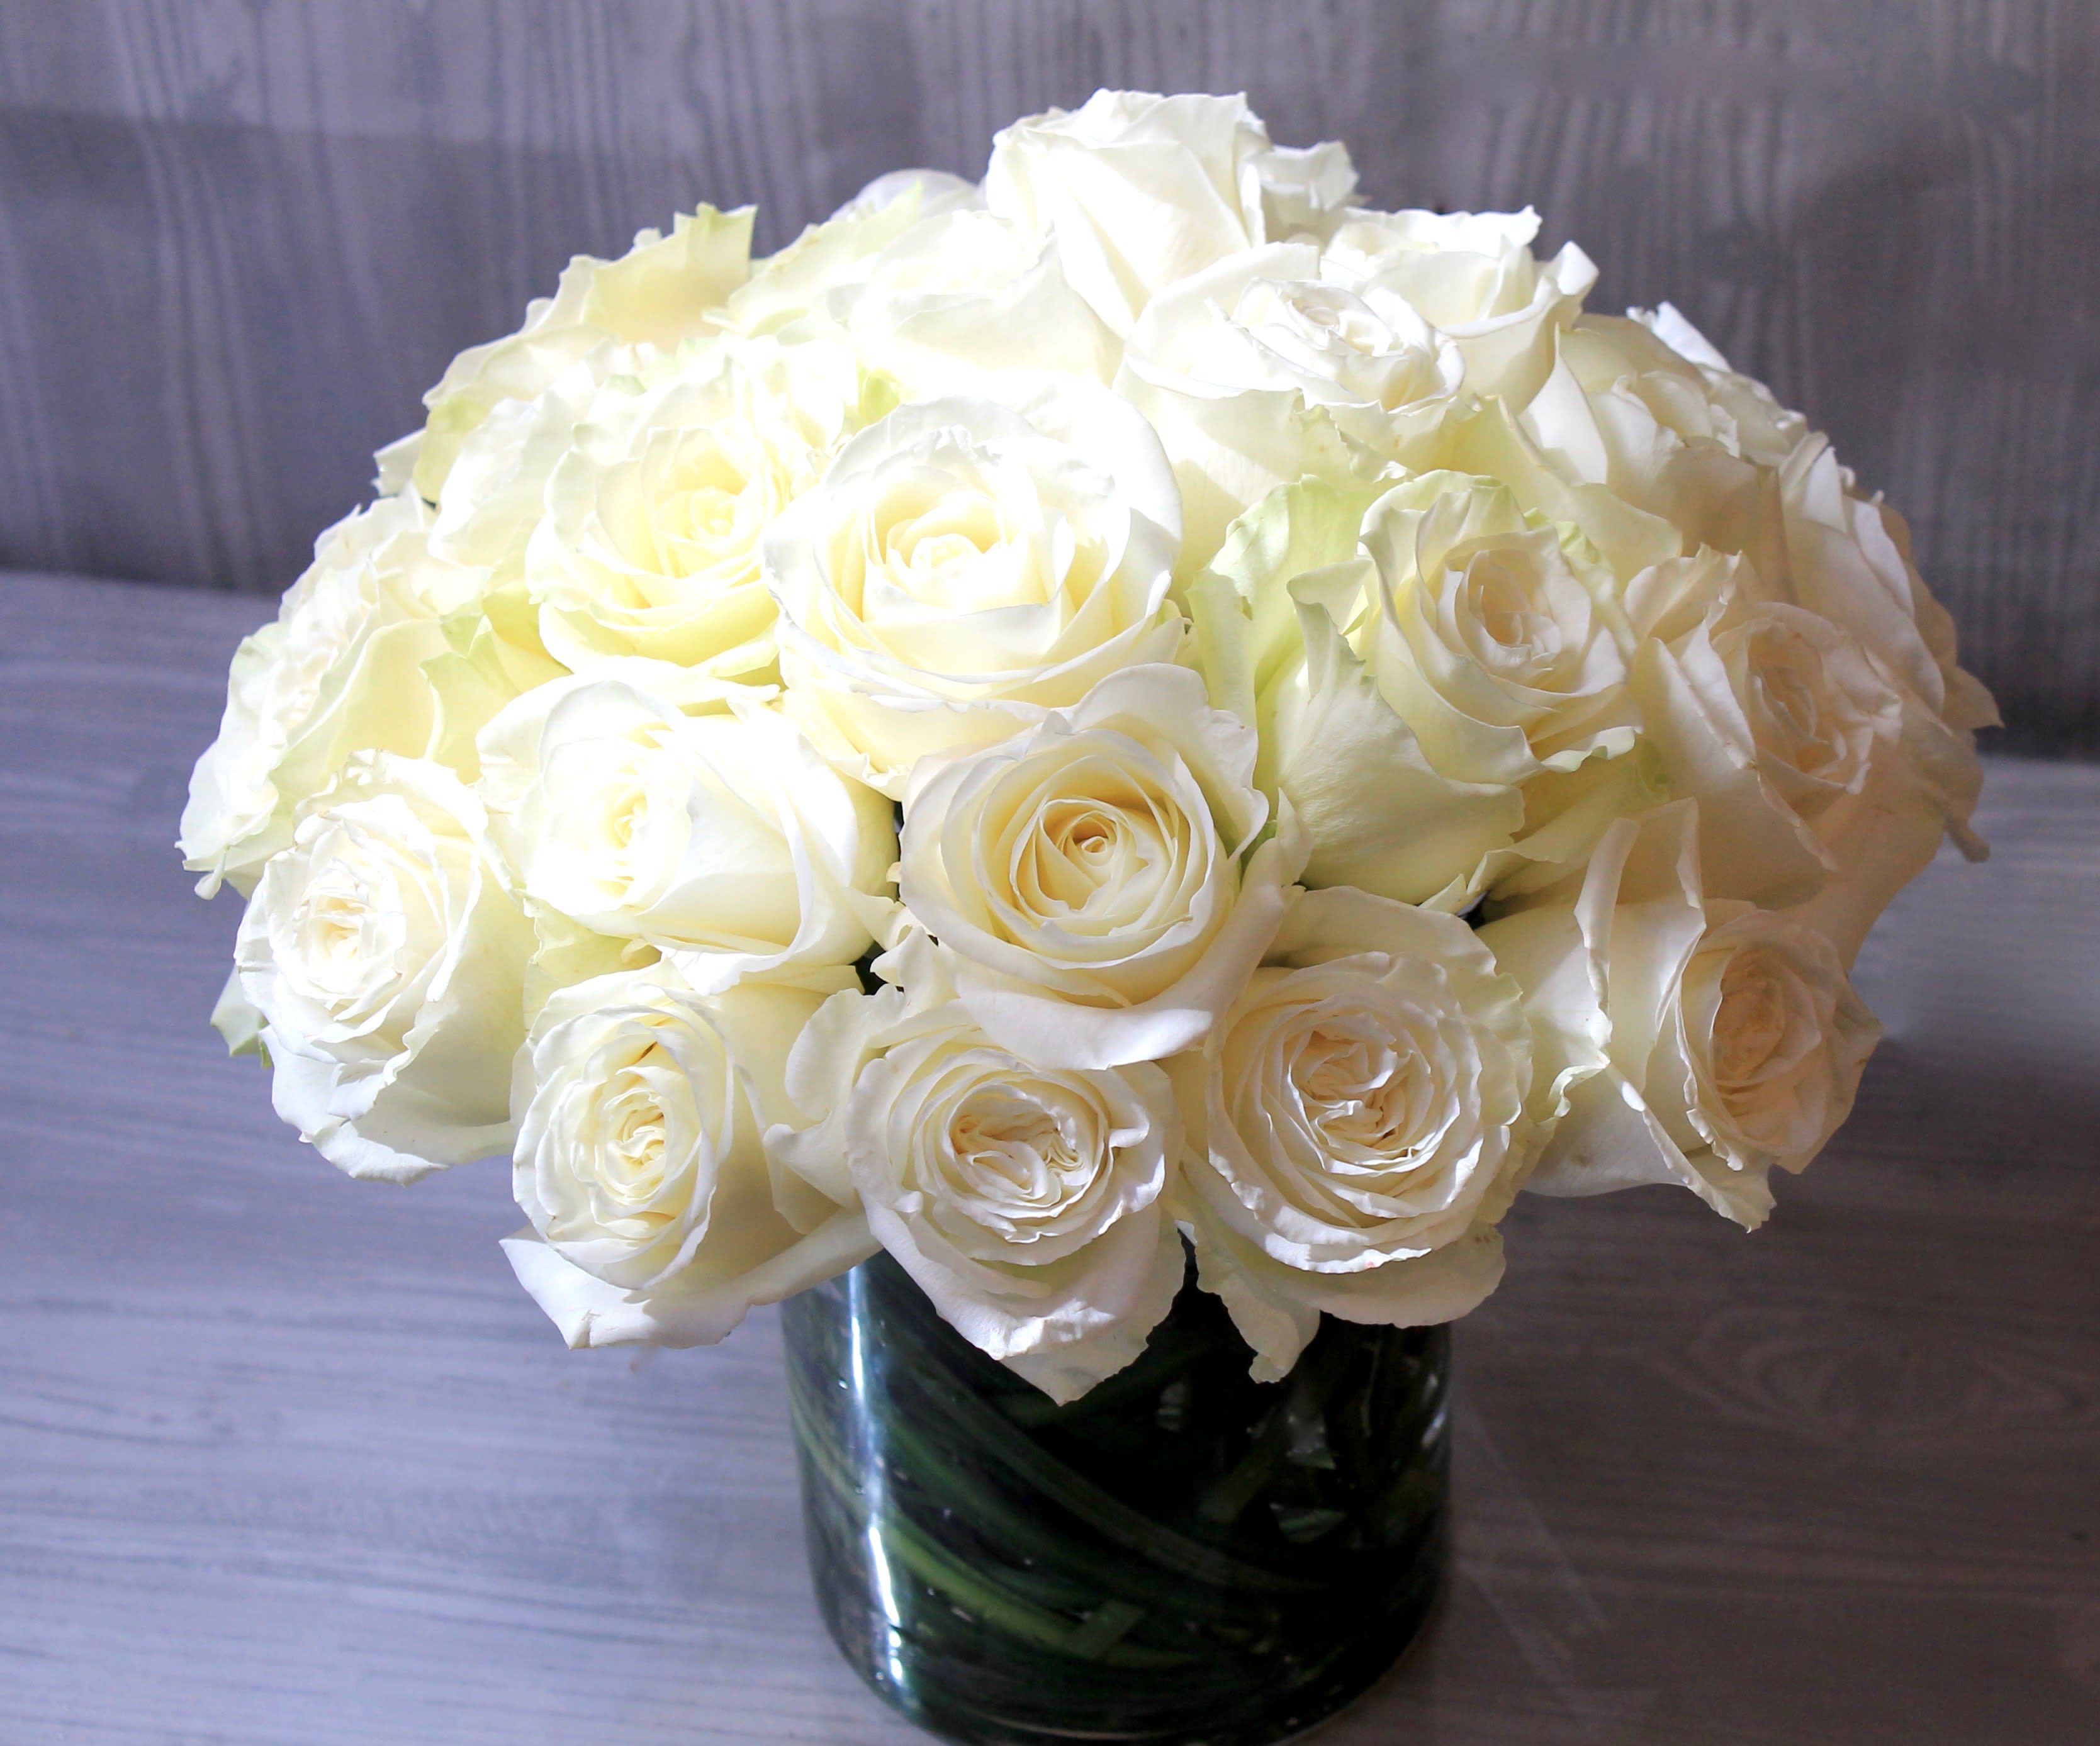 Two Dozen White Roses - Make a bold statement with this elegantly simple design. White roses symbolize hope, honor, adoration, and innocence. Two Dozen White Roses is the perfect gift to welcome new beginnings or show your respects. A classic design to send your love or sympathy wishes. Send the best flowers from the best flower shop in New York. We offer same day flower delivery in Manhattan, Queens, Bronx, Brooklyn, Staten Island and West Chester counties. We have the prettiest and most luxurious flowers to choose from and our designs are unique and whimsical. We carry Peonies almost every day of the year!!#mercuryvase #weddingflowers #luxuryflowers #ranunculus #peony #peonies #flowerdelivery #samedaydelivery #funeralflowers   Arrangement Details: 2 dozen white roses in a glass cylinder vase.  APPROXIMATE DIMENSIONS are 11&quot;D X 12&quot;H